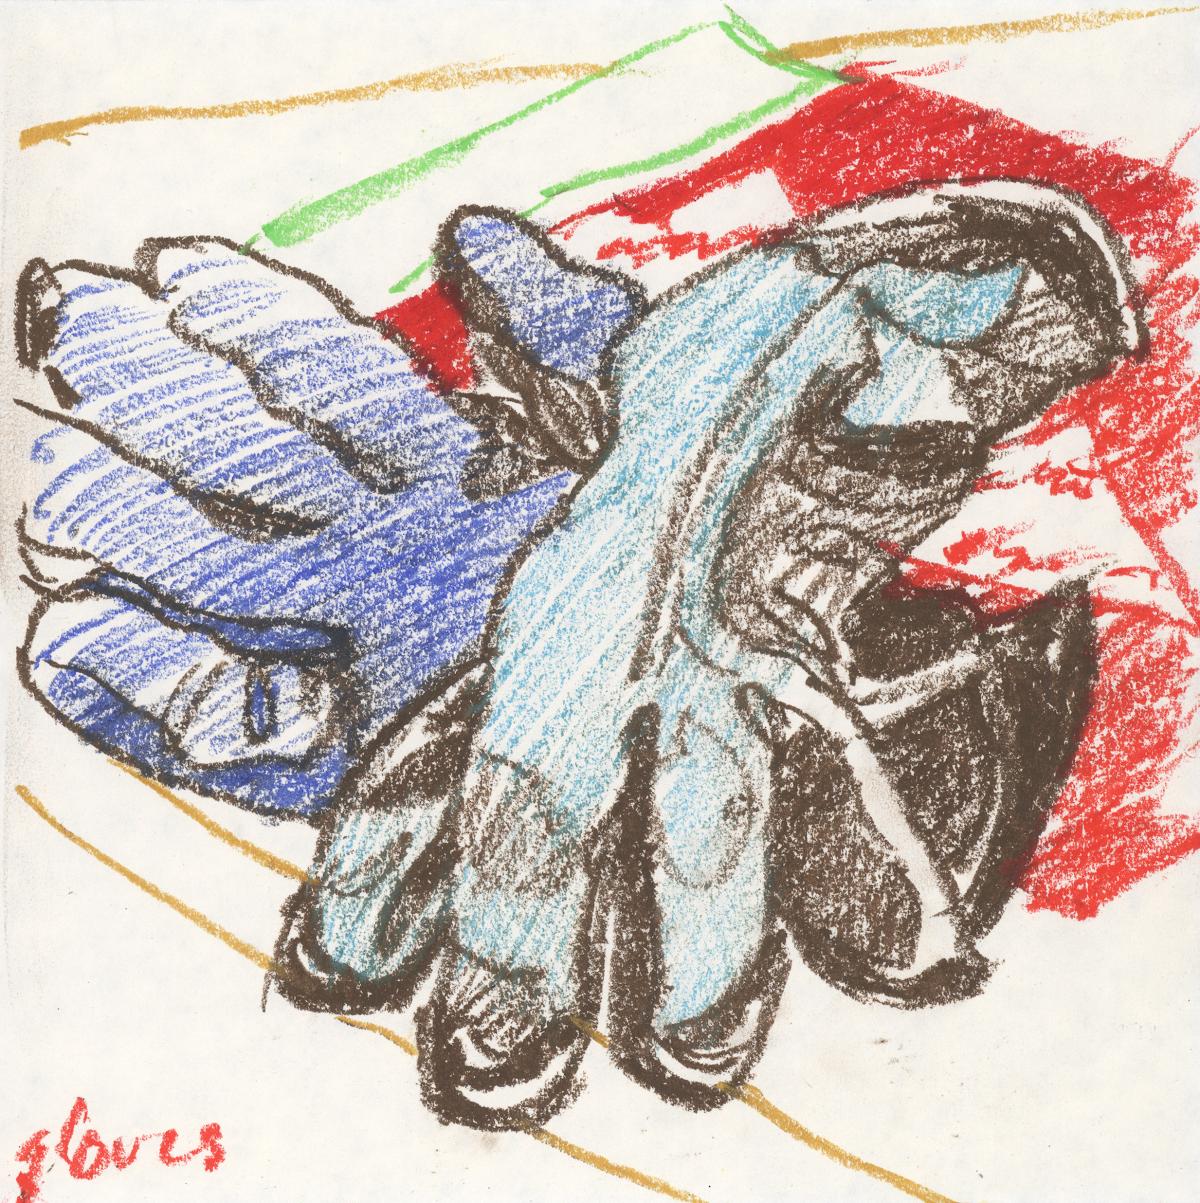 Gloves Worn I - oil pastel still life drawing by Frank Costantino